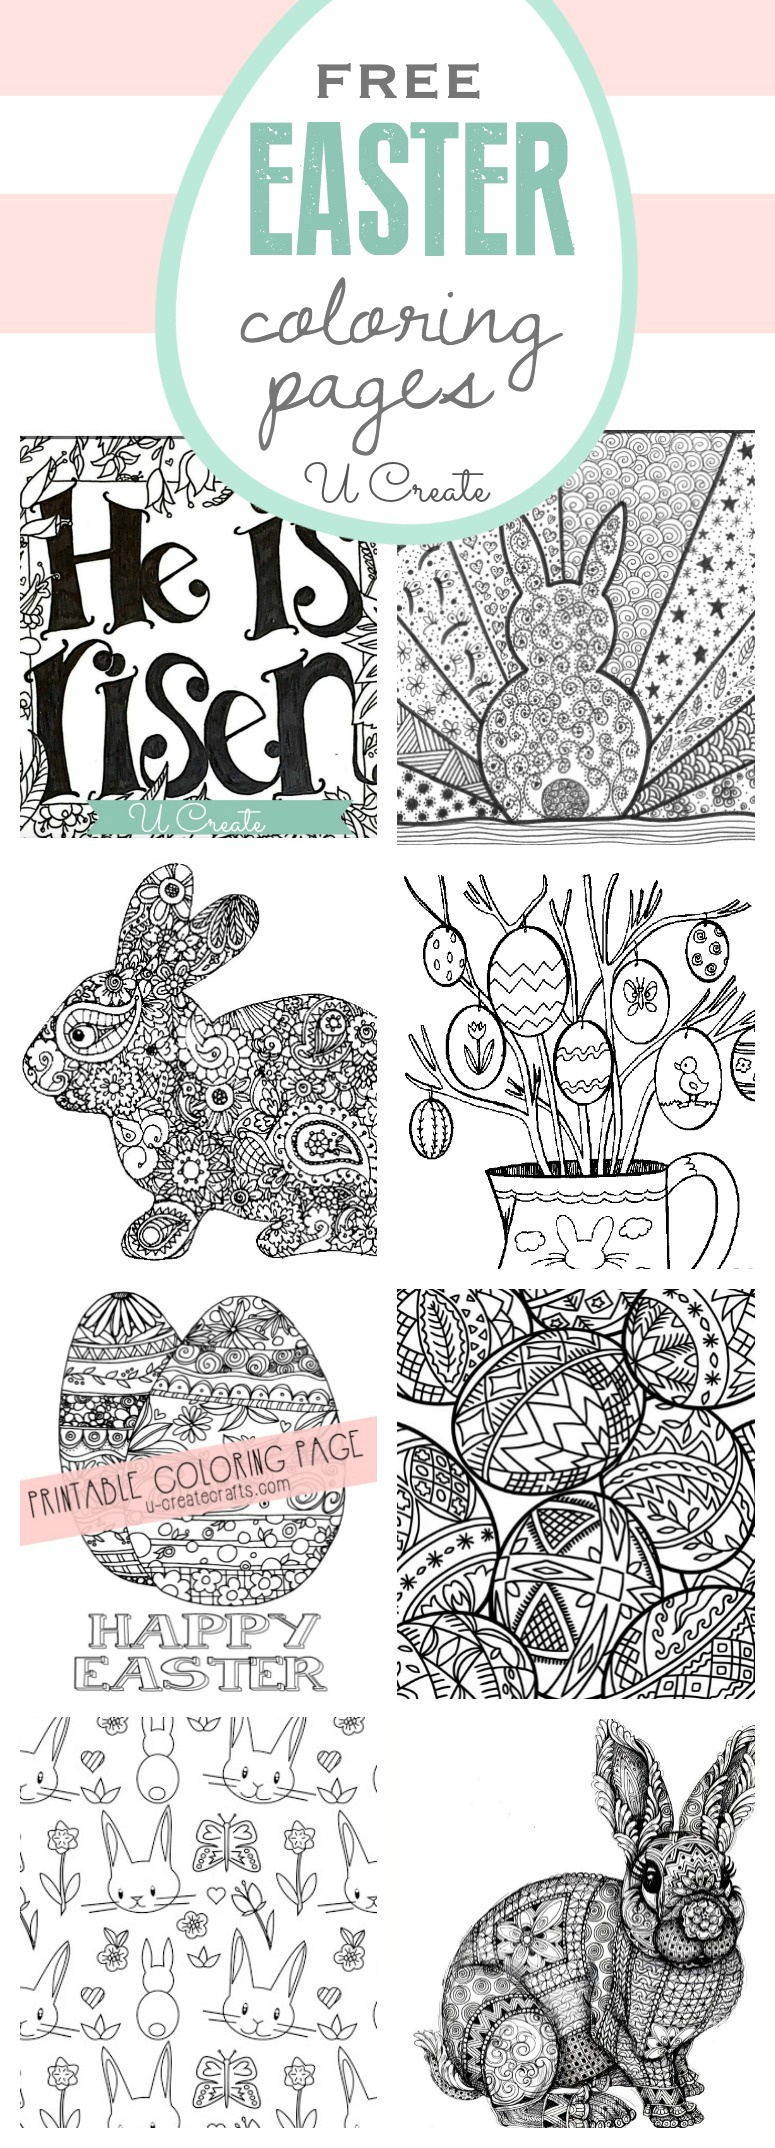 http://www.u-createcrafts.com/wp-content/uploads/2016/03/free-easter-coloring-pages.jpg